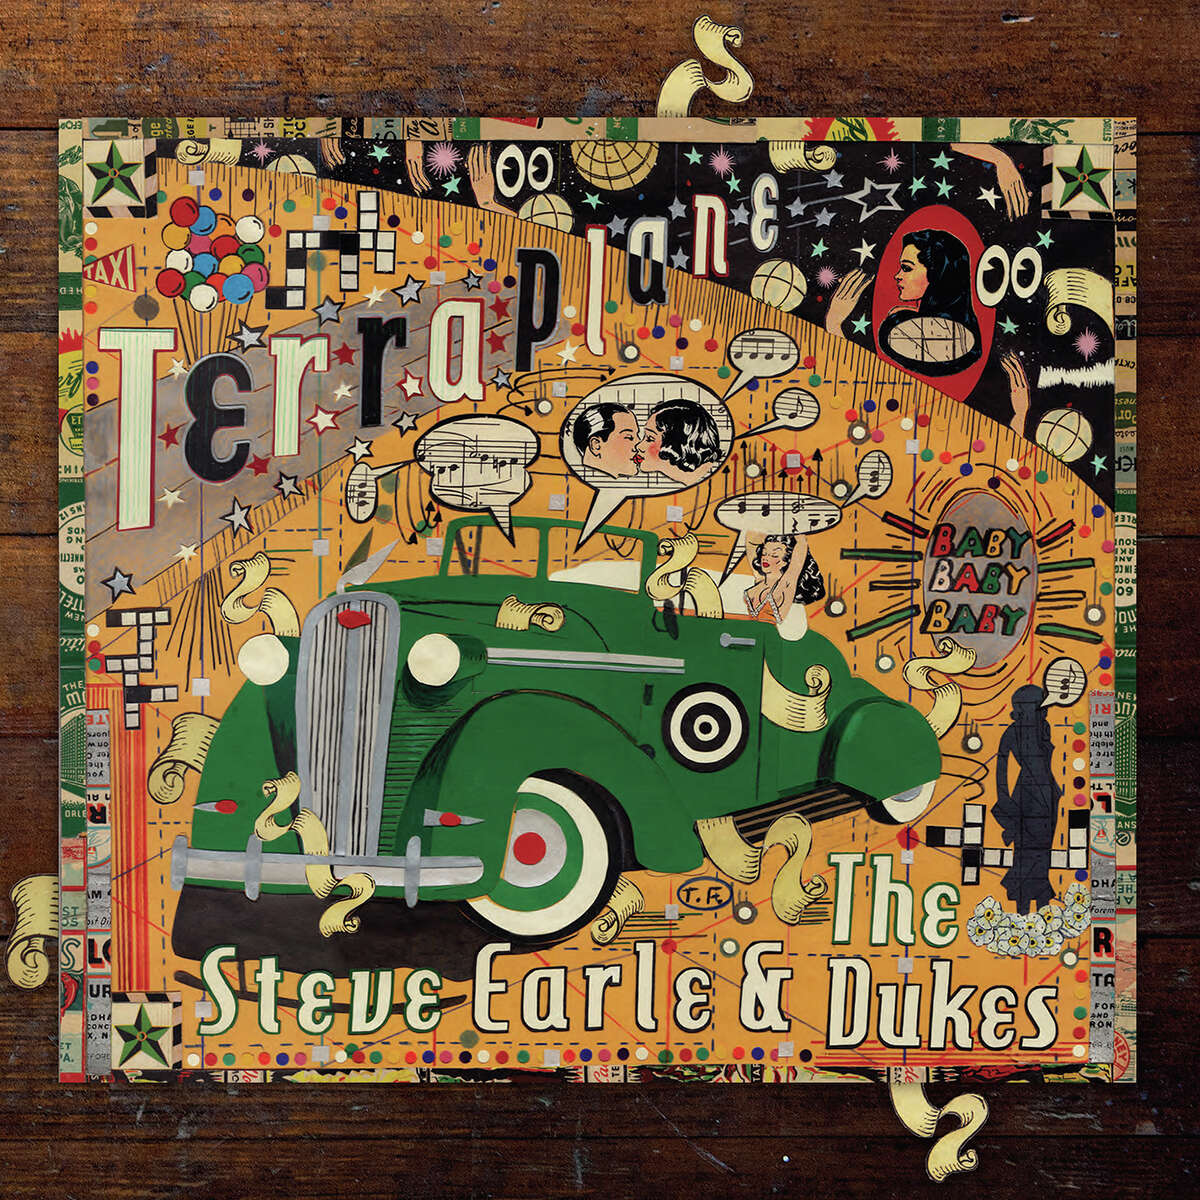 Album cover for Terraplane, a recording by Steve Earle